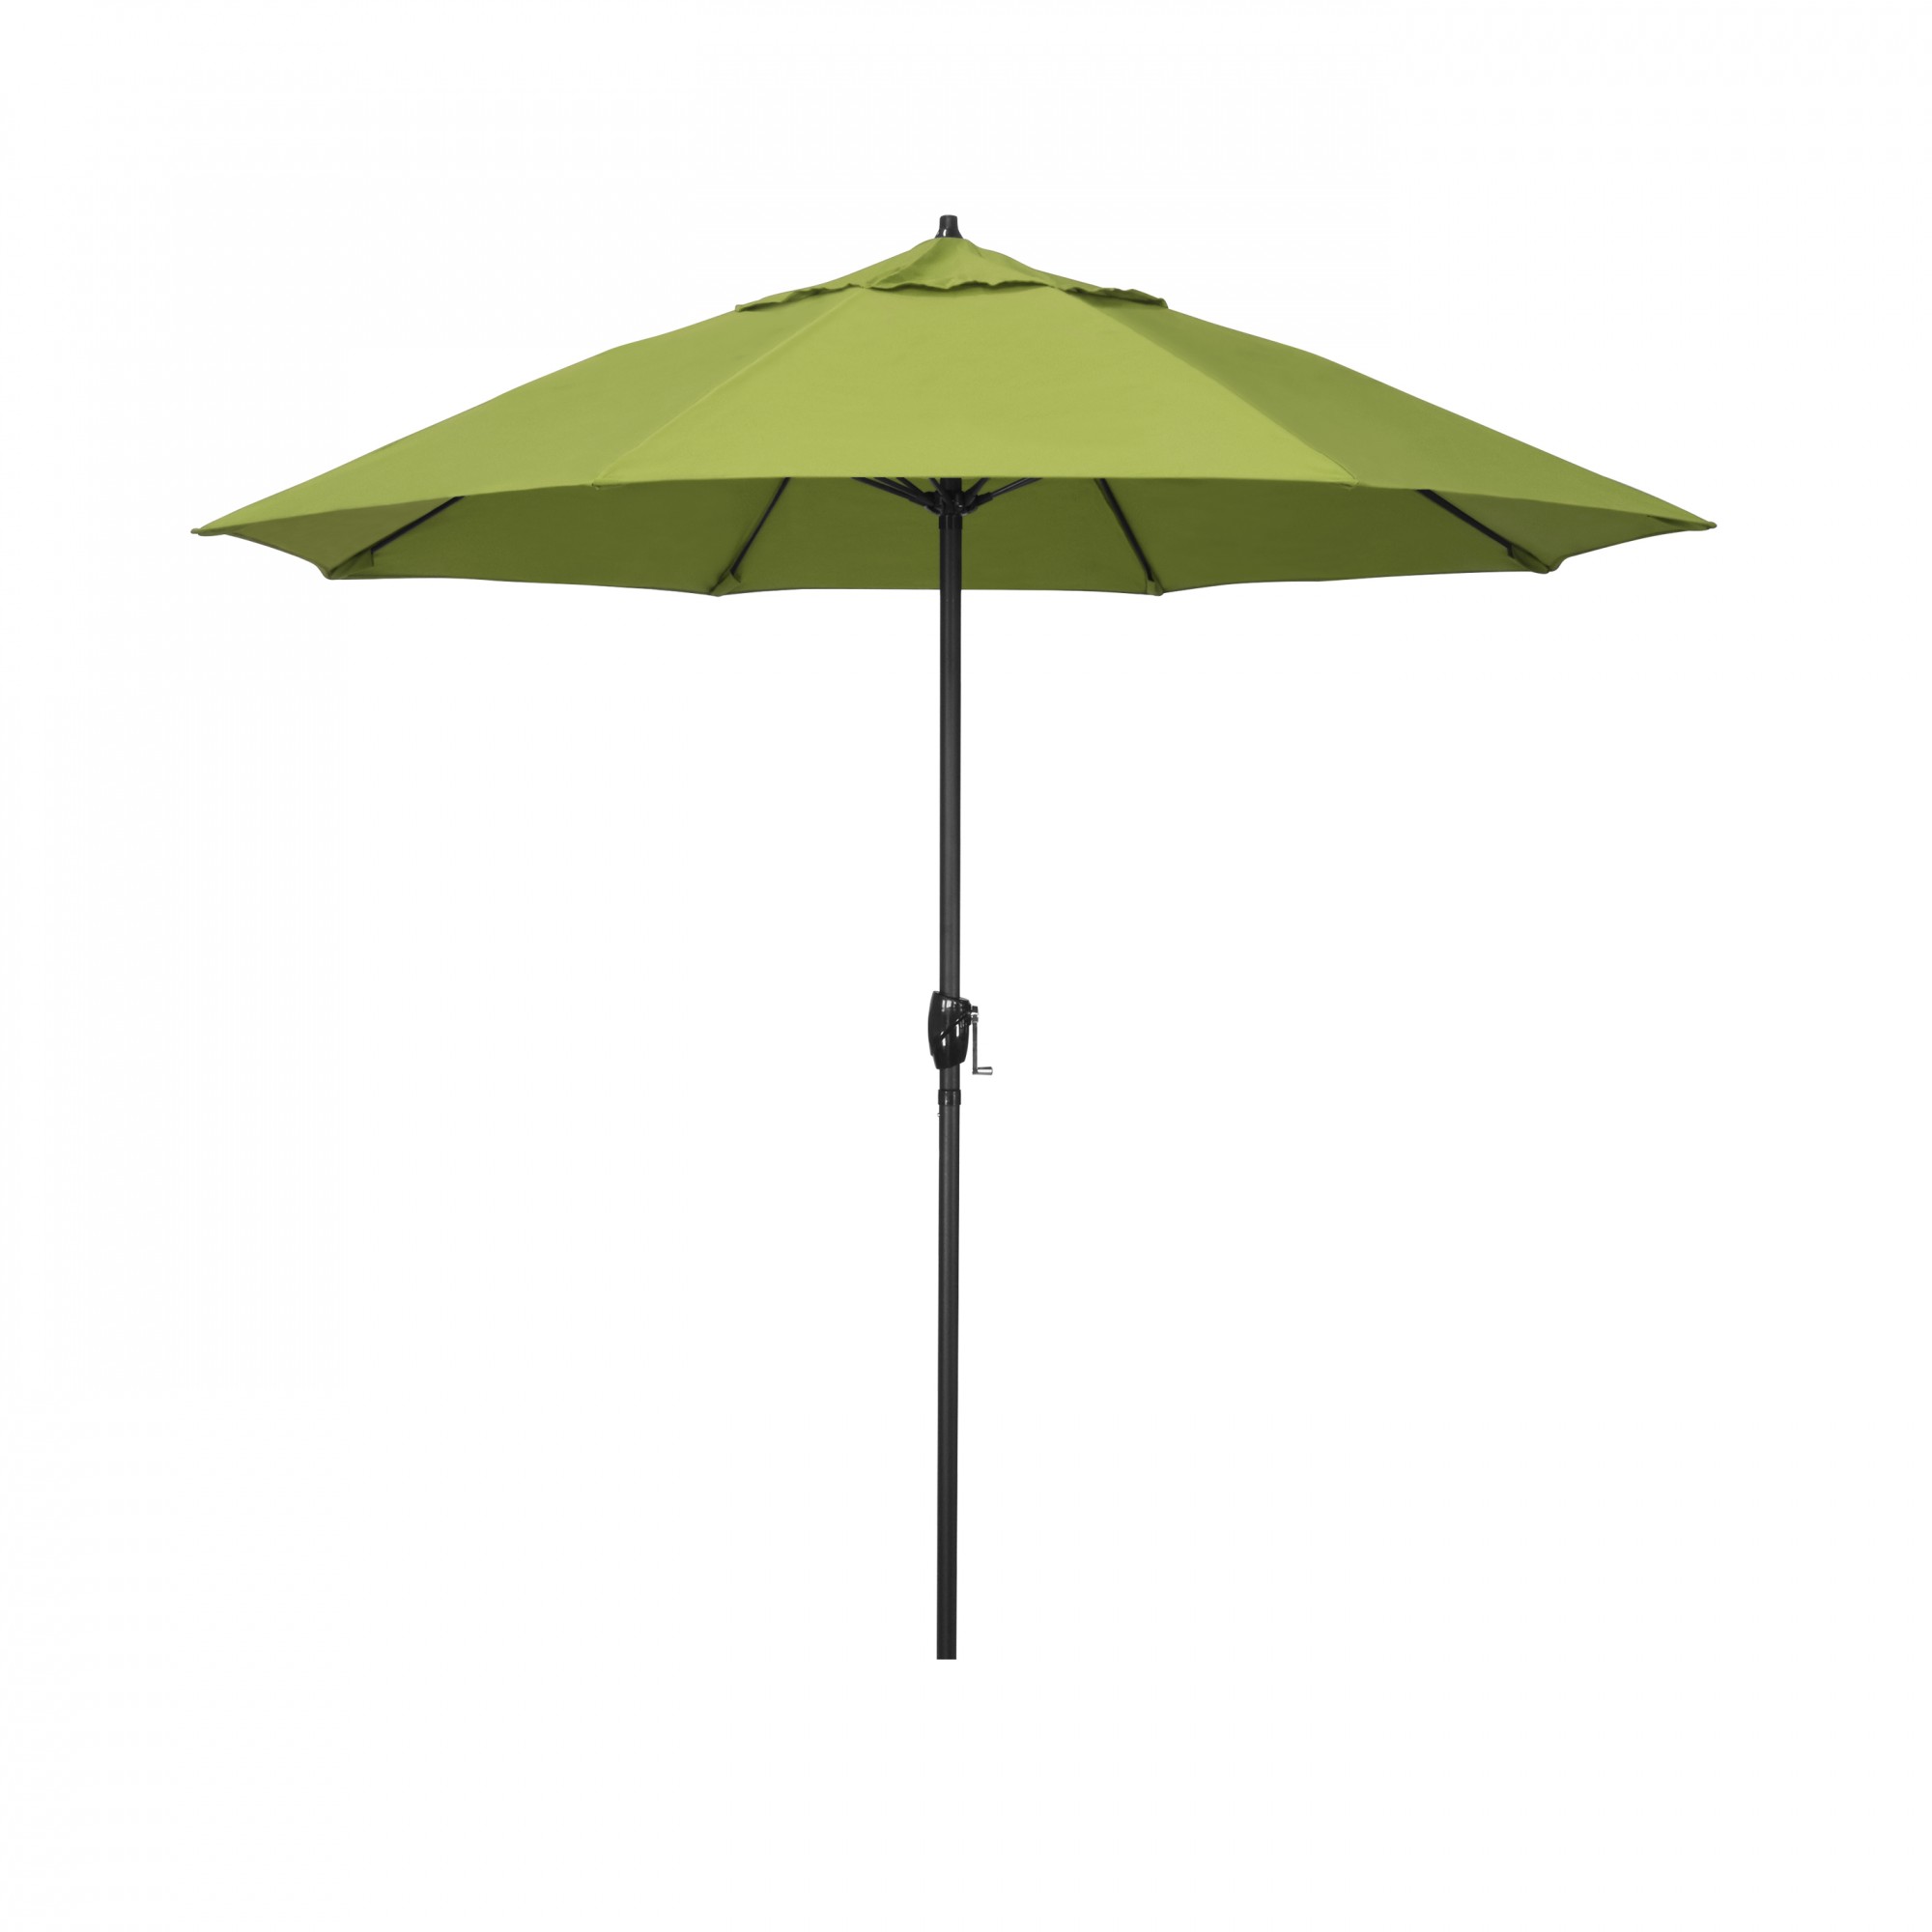 Outdoor Living and Style 9ft Outdoor Casa Series Sunbrella Canopy Patio Umbrella With Crank Open and Auto Tilt System, Apple Green